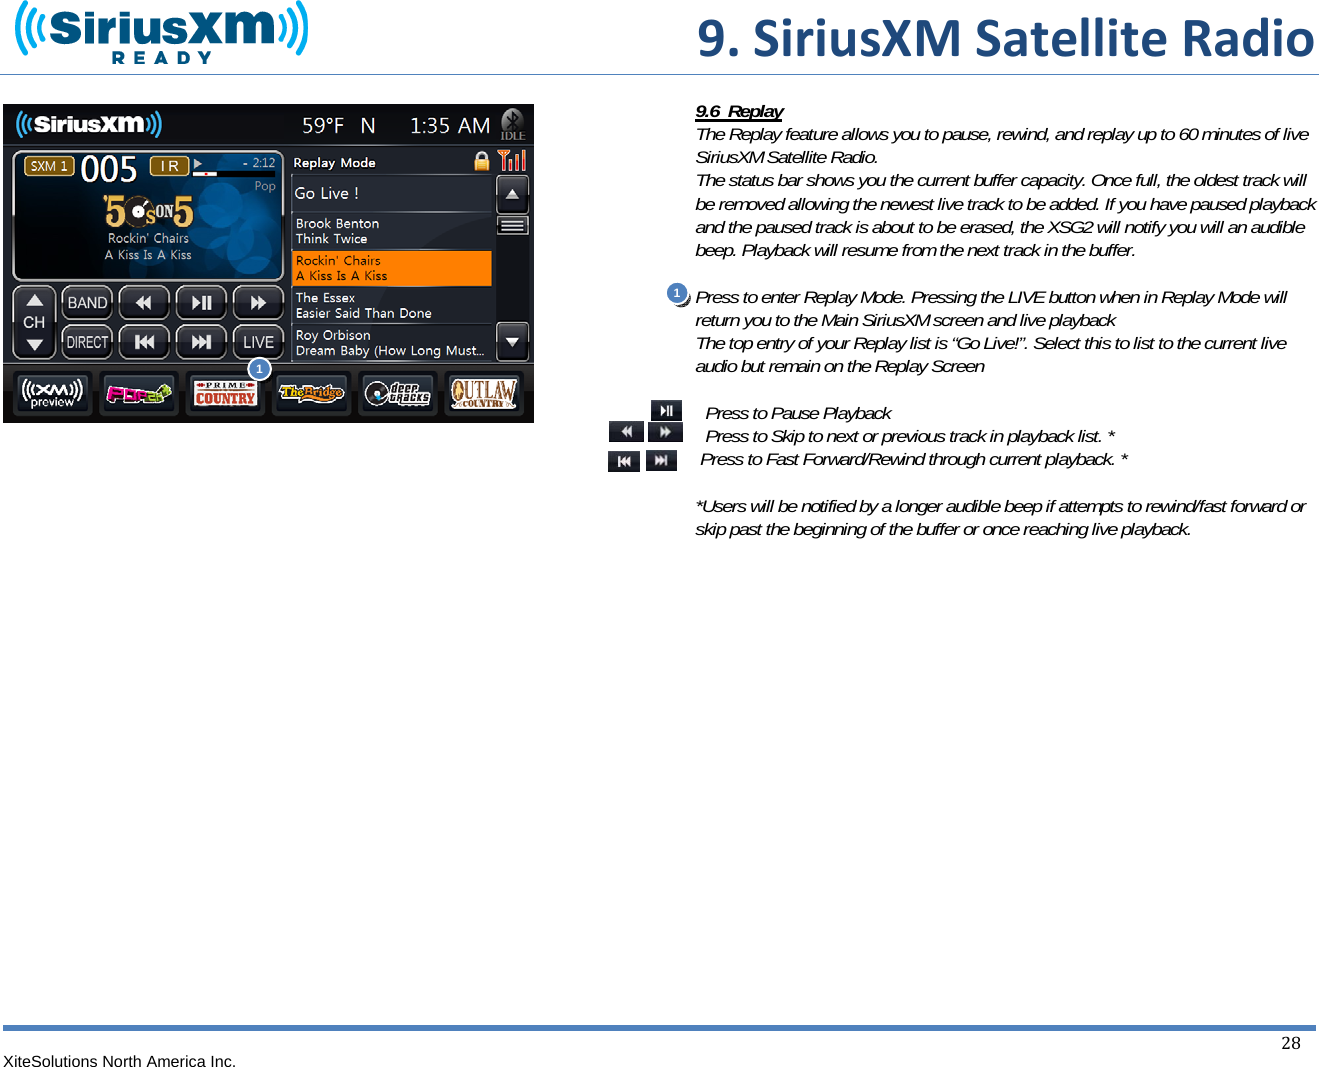  9.SiriusXMSatelliteRadioXiteSolutions North America Inc.  28                                     9.6  Replay The Replay feature allows you to pause, rewind, and replay up to 60 minutes of live SiriusXM Satellite Radio. The status bar shows you the current buffer capacity. Once full, the oldest track will be removed allowing the newest live track to be added. If you have paused playback and the paused track is about to be erased, the XSG2 will notify you will an audible beep. Playback will resume from the next track in the buffer.  Press to enter Replay Mode. Pressing the LIVE button when in Replay Mode will return you to the Main SiriusXM screen and live playback The top entry of your Replay list is “Go Live!”. Select this to list to the current live audio but remain on the Replay Screen   Press to Pause Playback  Press to Skip to next or previous track in playback list. *  Press to Fast Forward/Rewind through current playback. *  *Users will be notified by a longer audible beep if attempts to rewind/fast forward or skip past the beginning of the buffer or once reaching live playback.             1 1